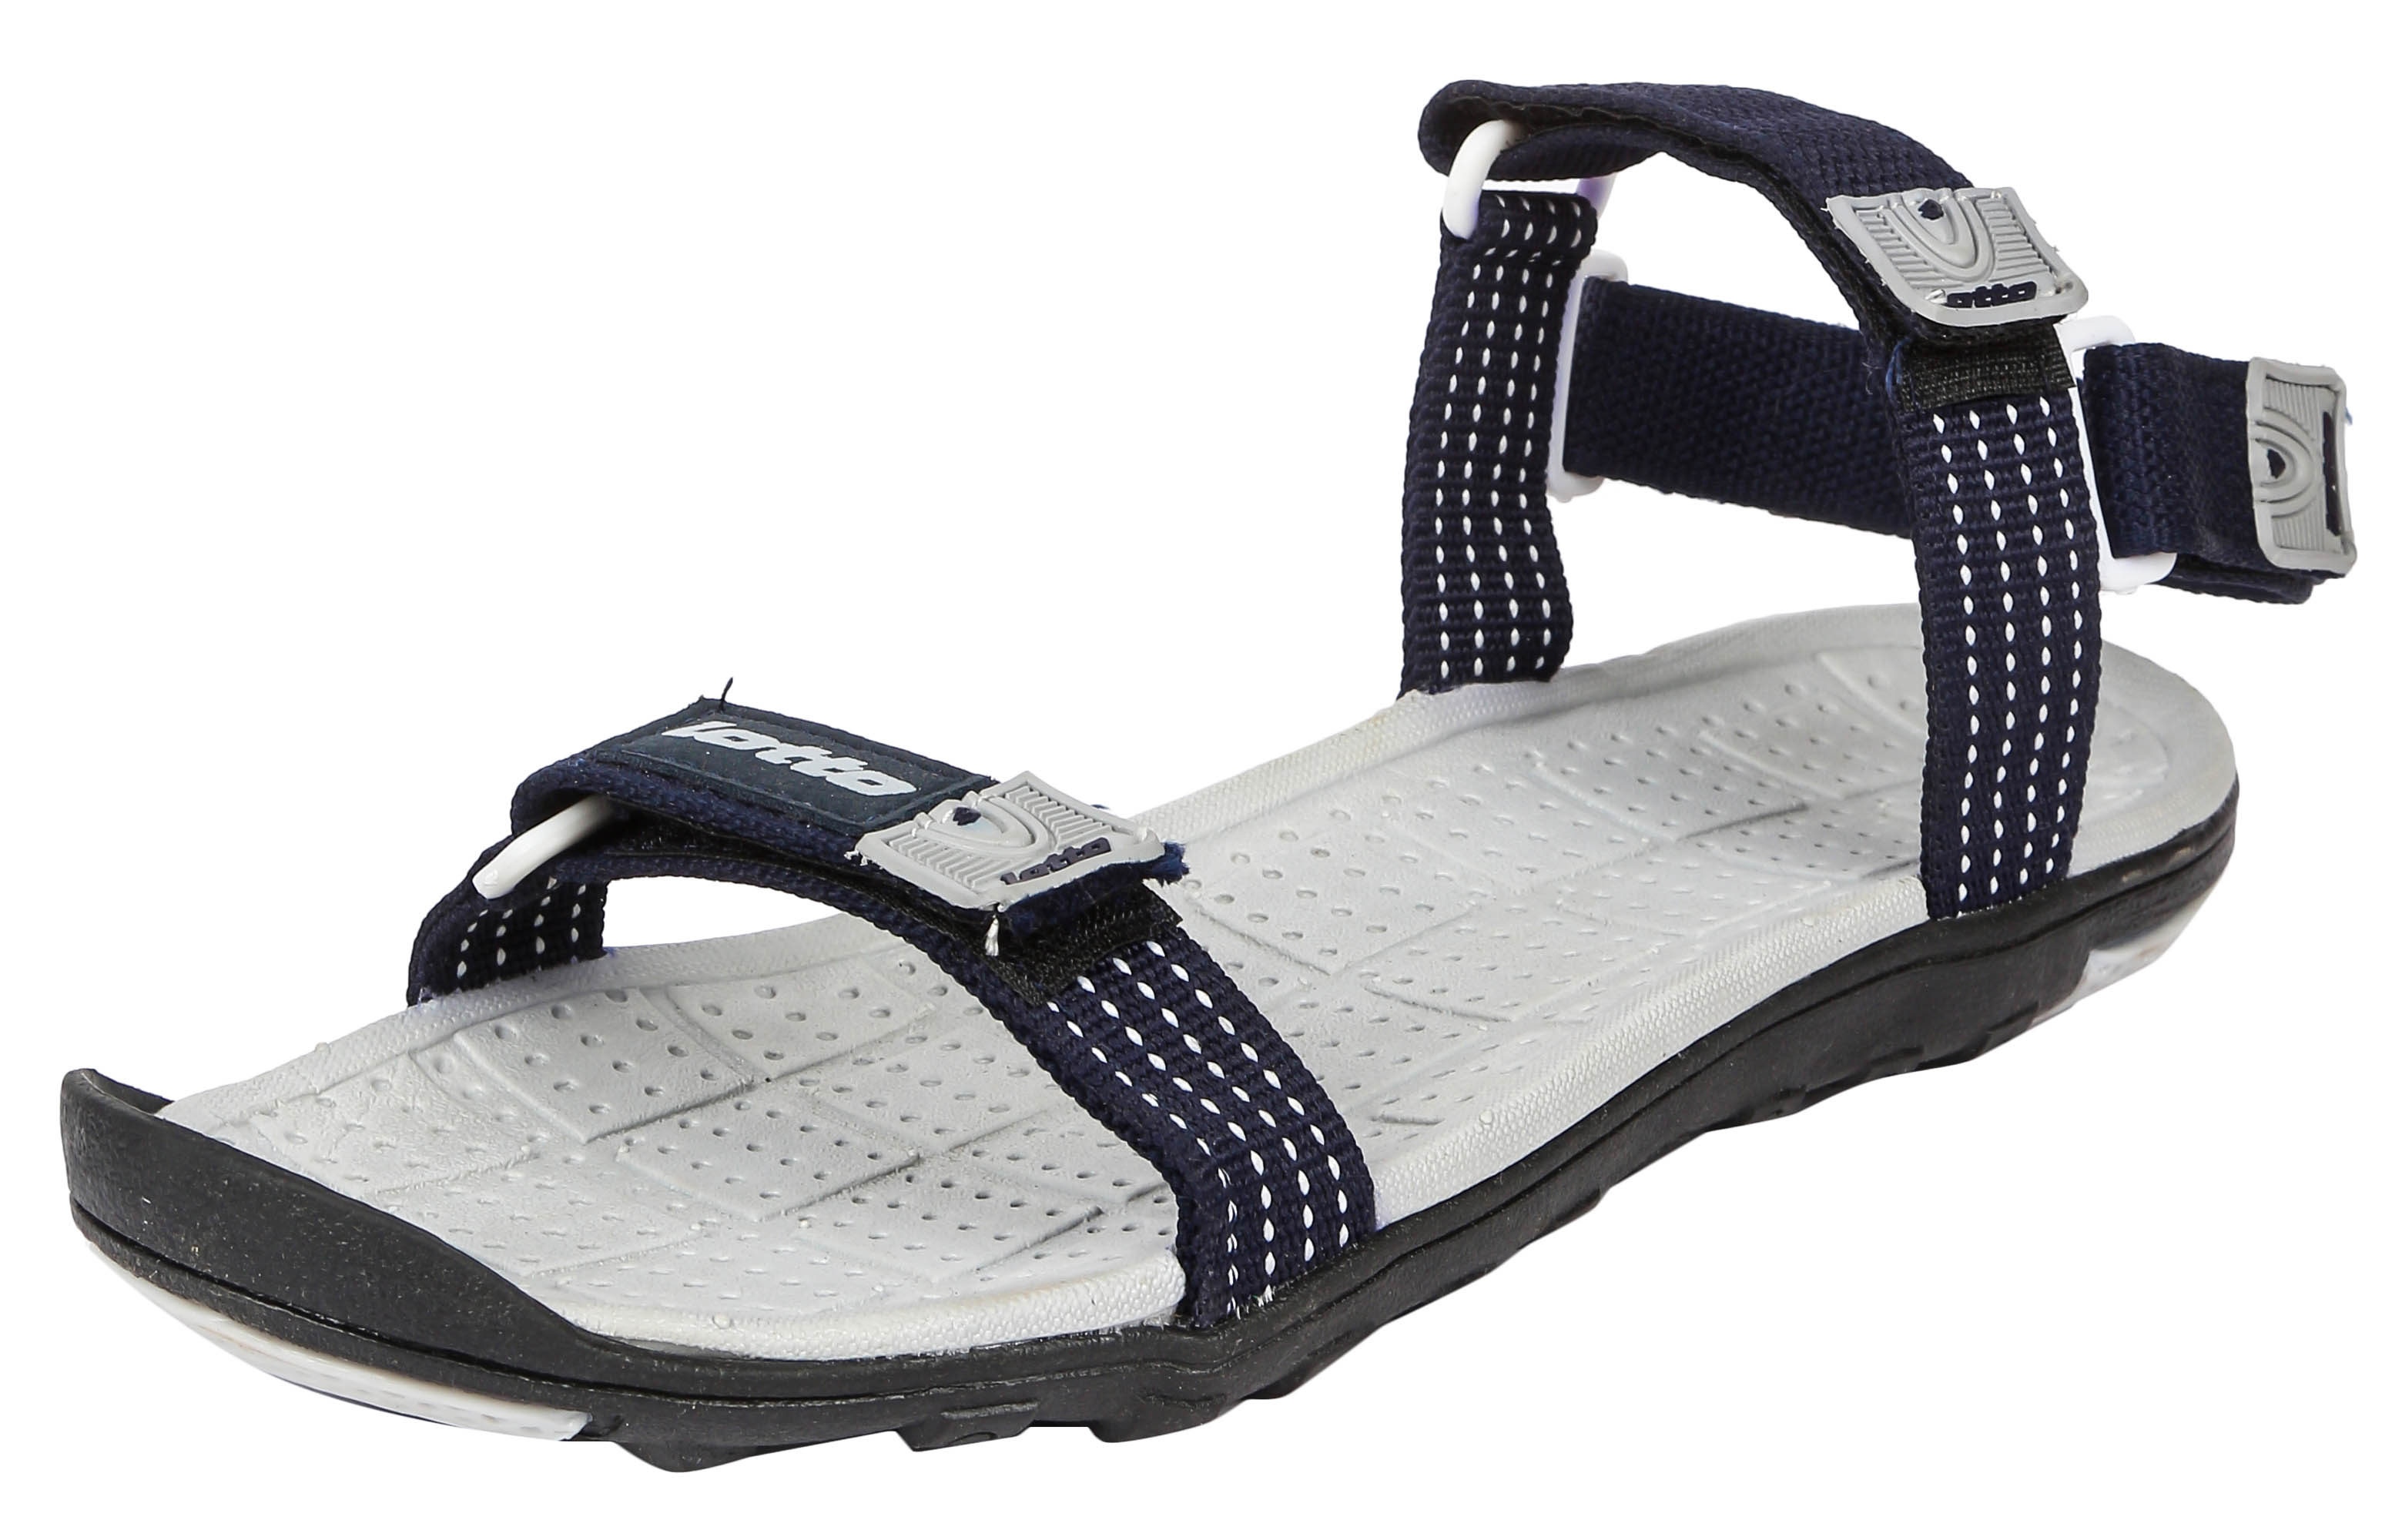 Buy Lotto Men's Casual Sandals Online @ ₹849 from ShopClues